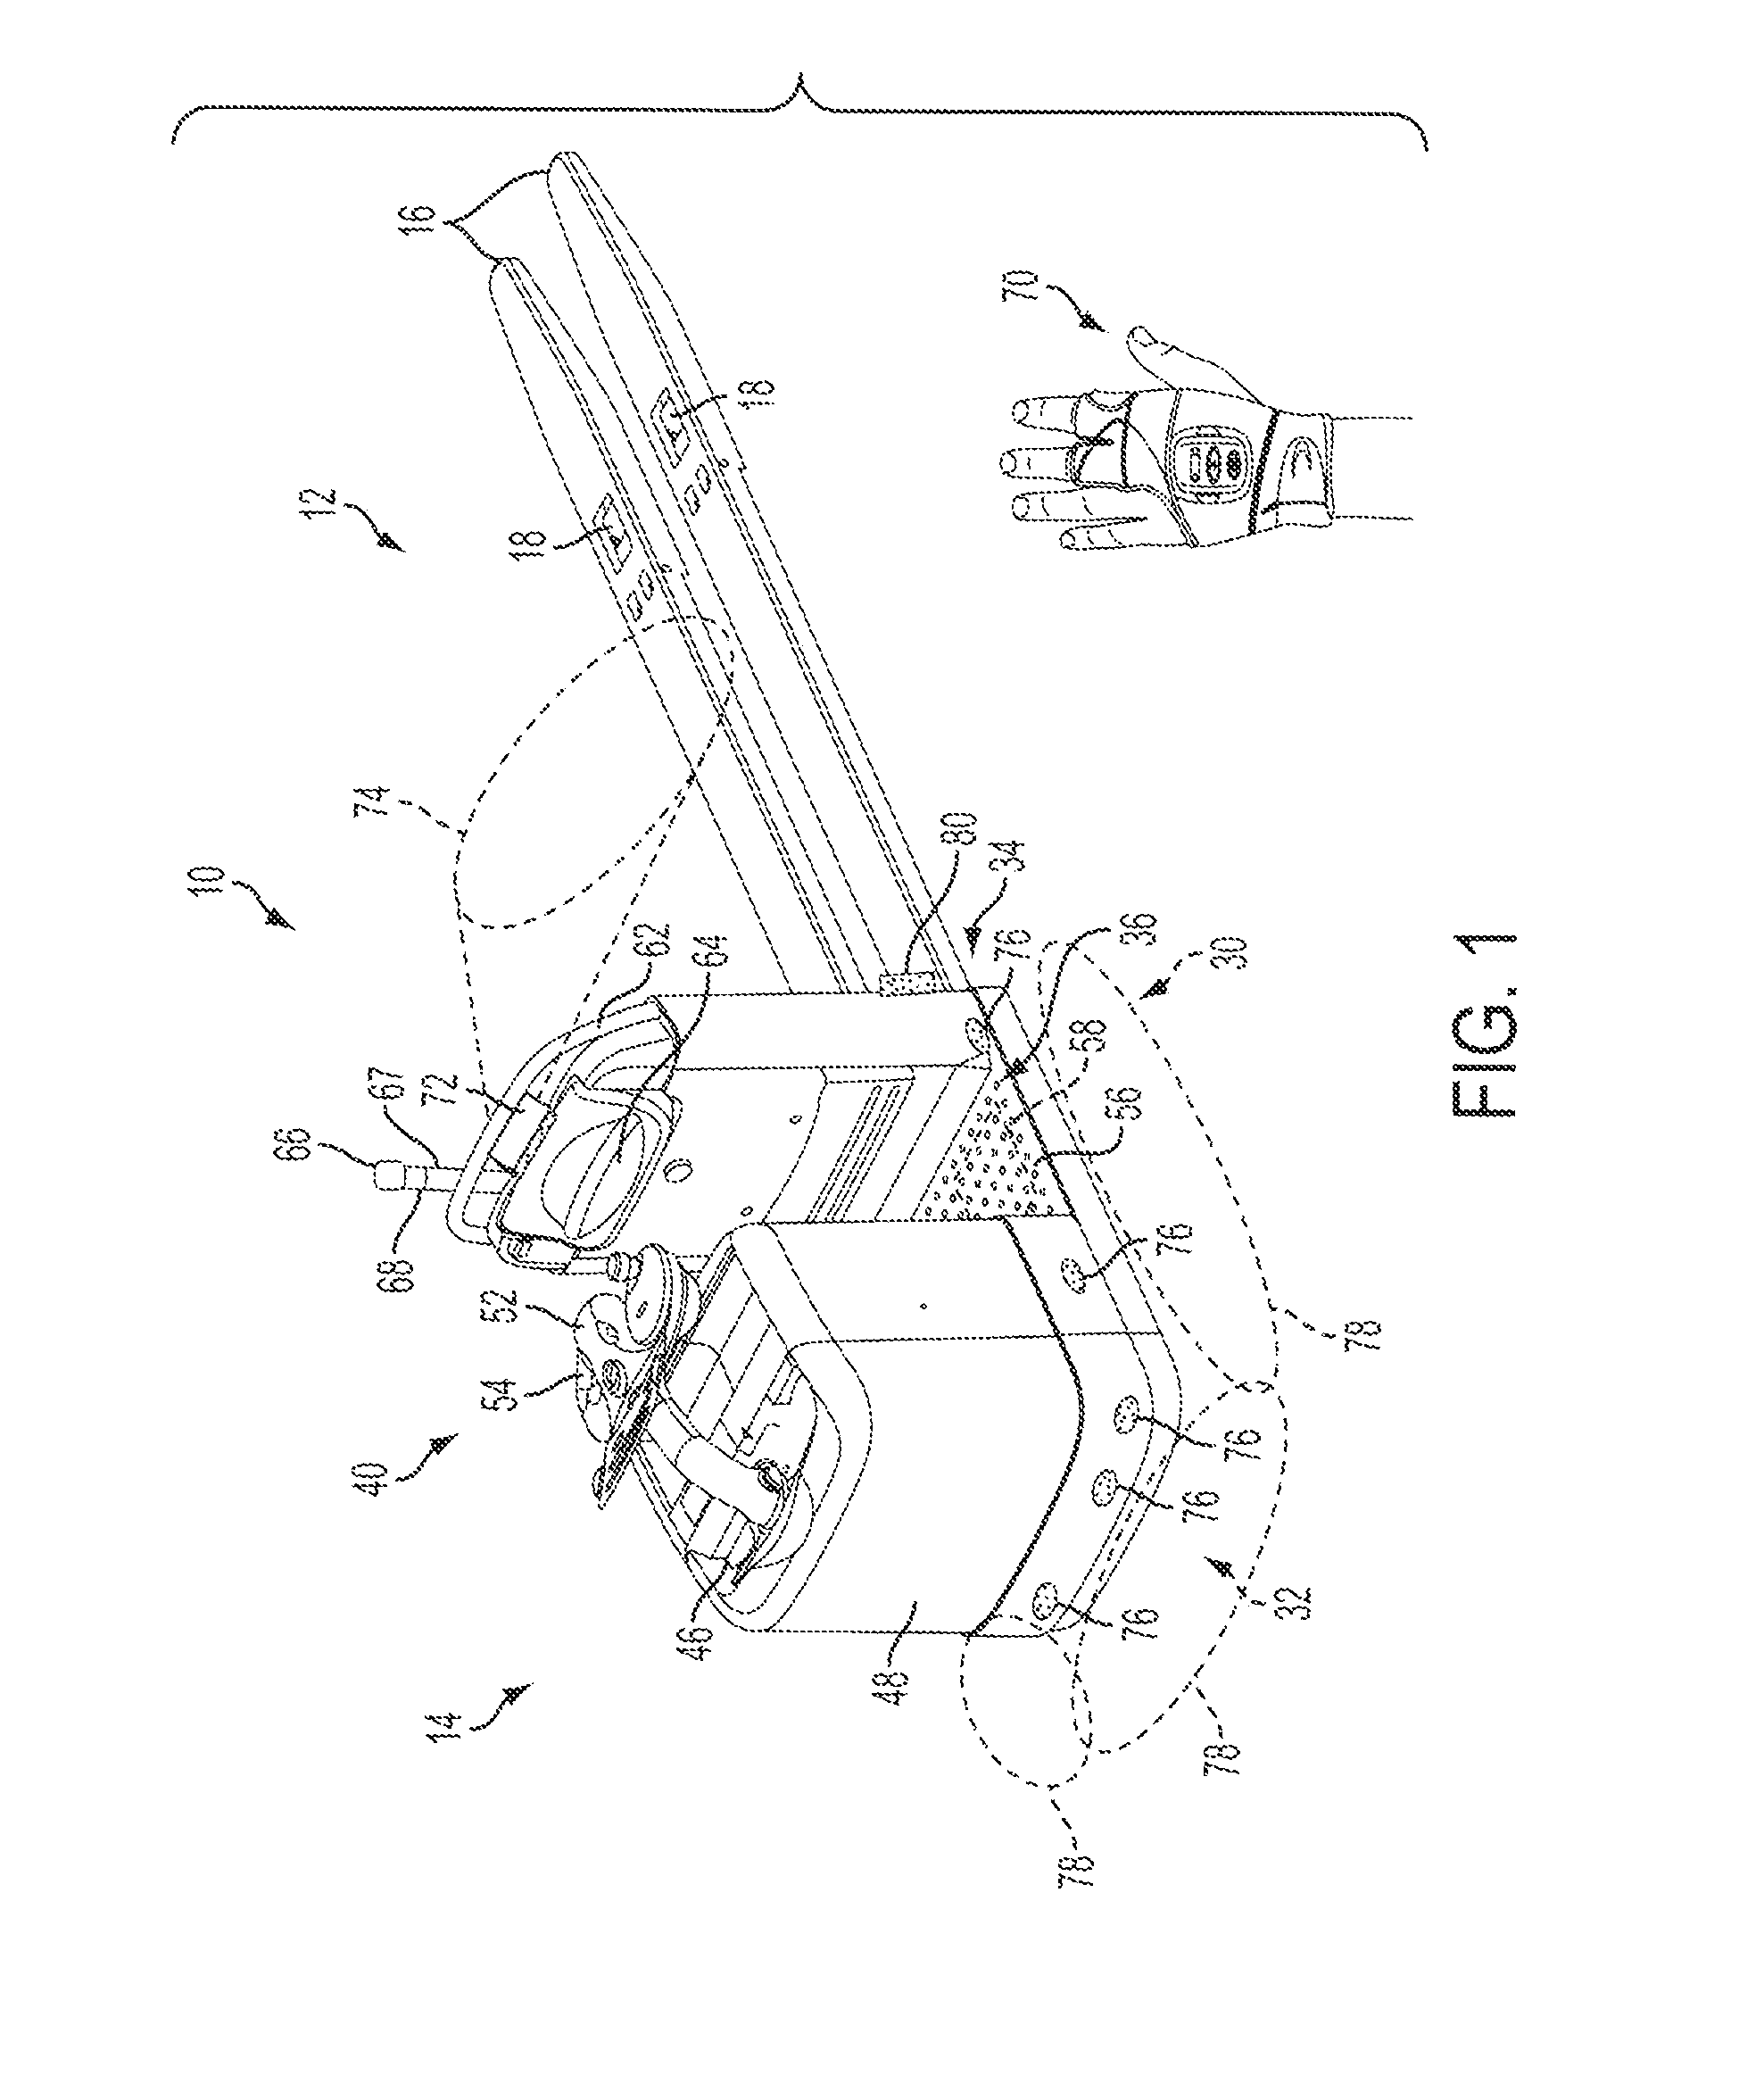 Device for remotely controlling a materials handling vehicle